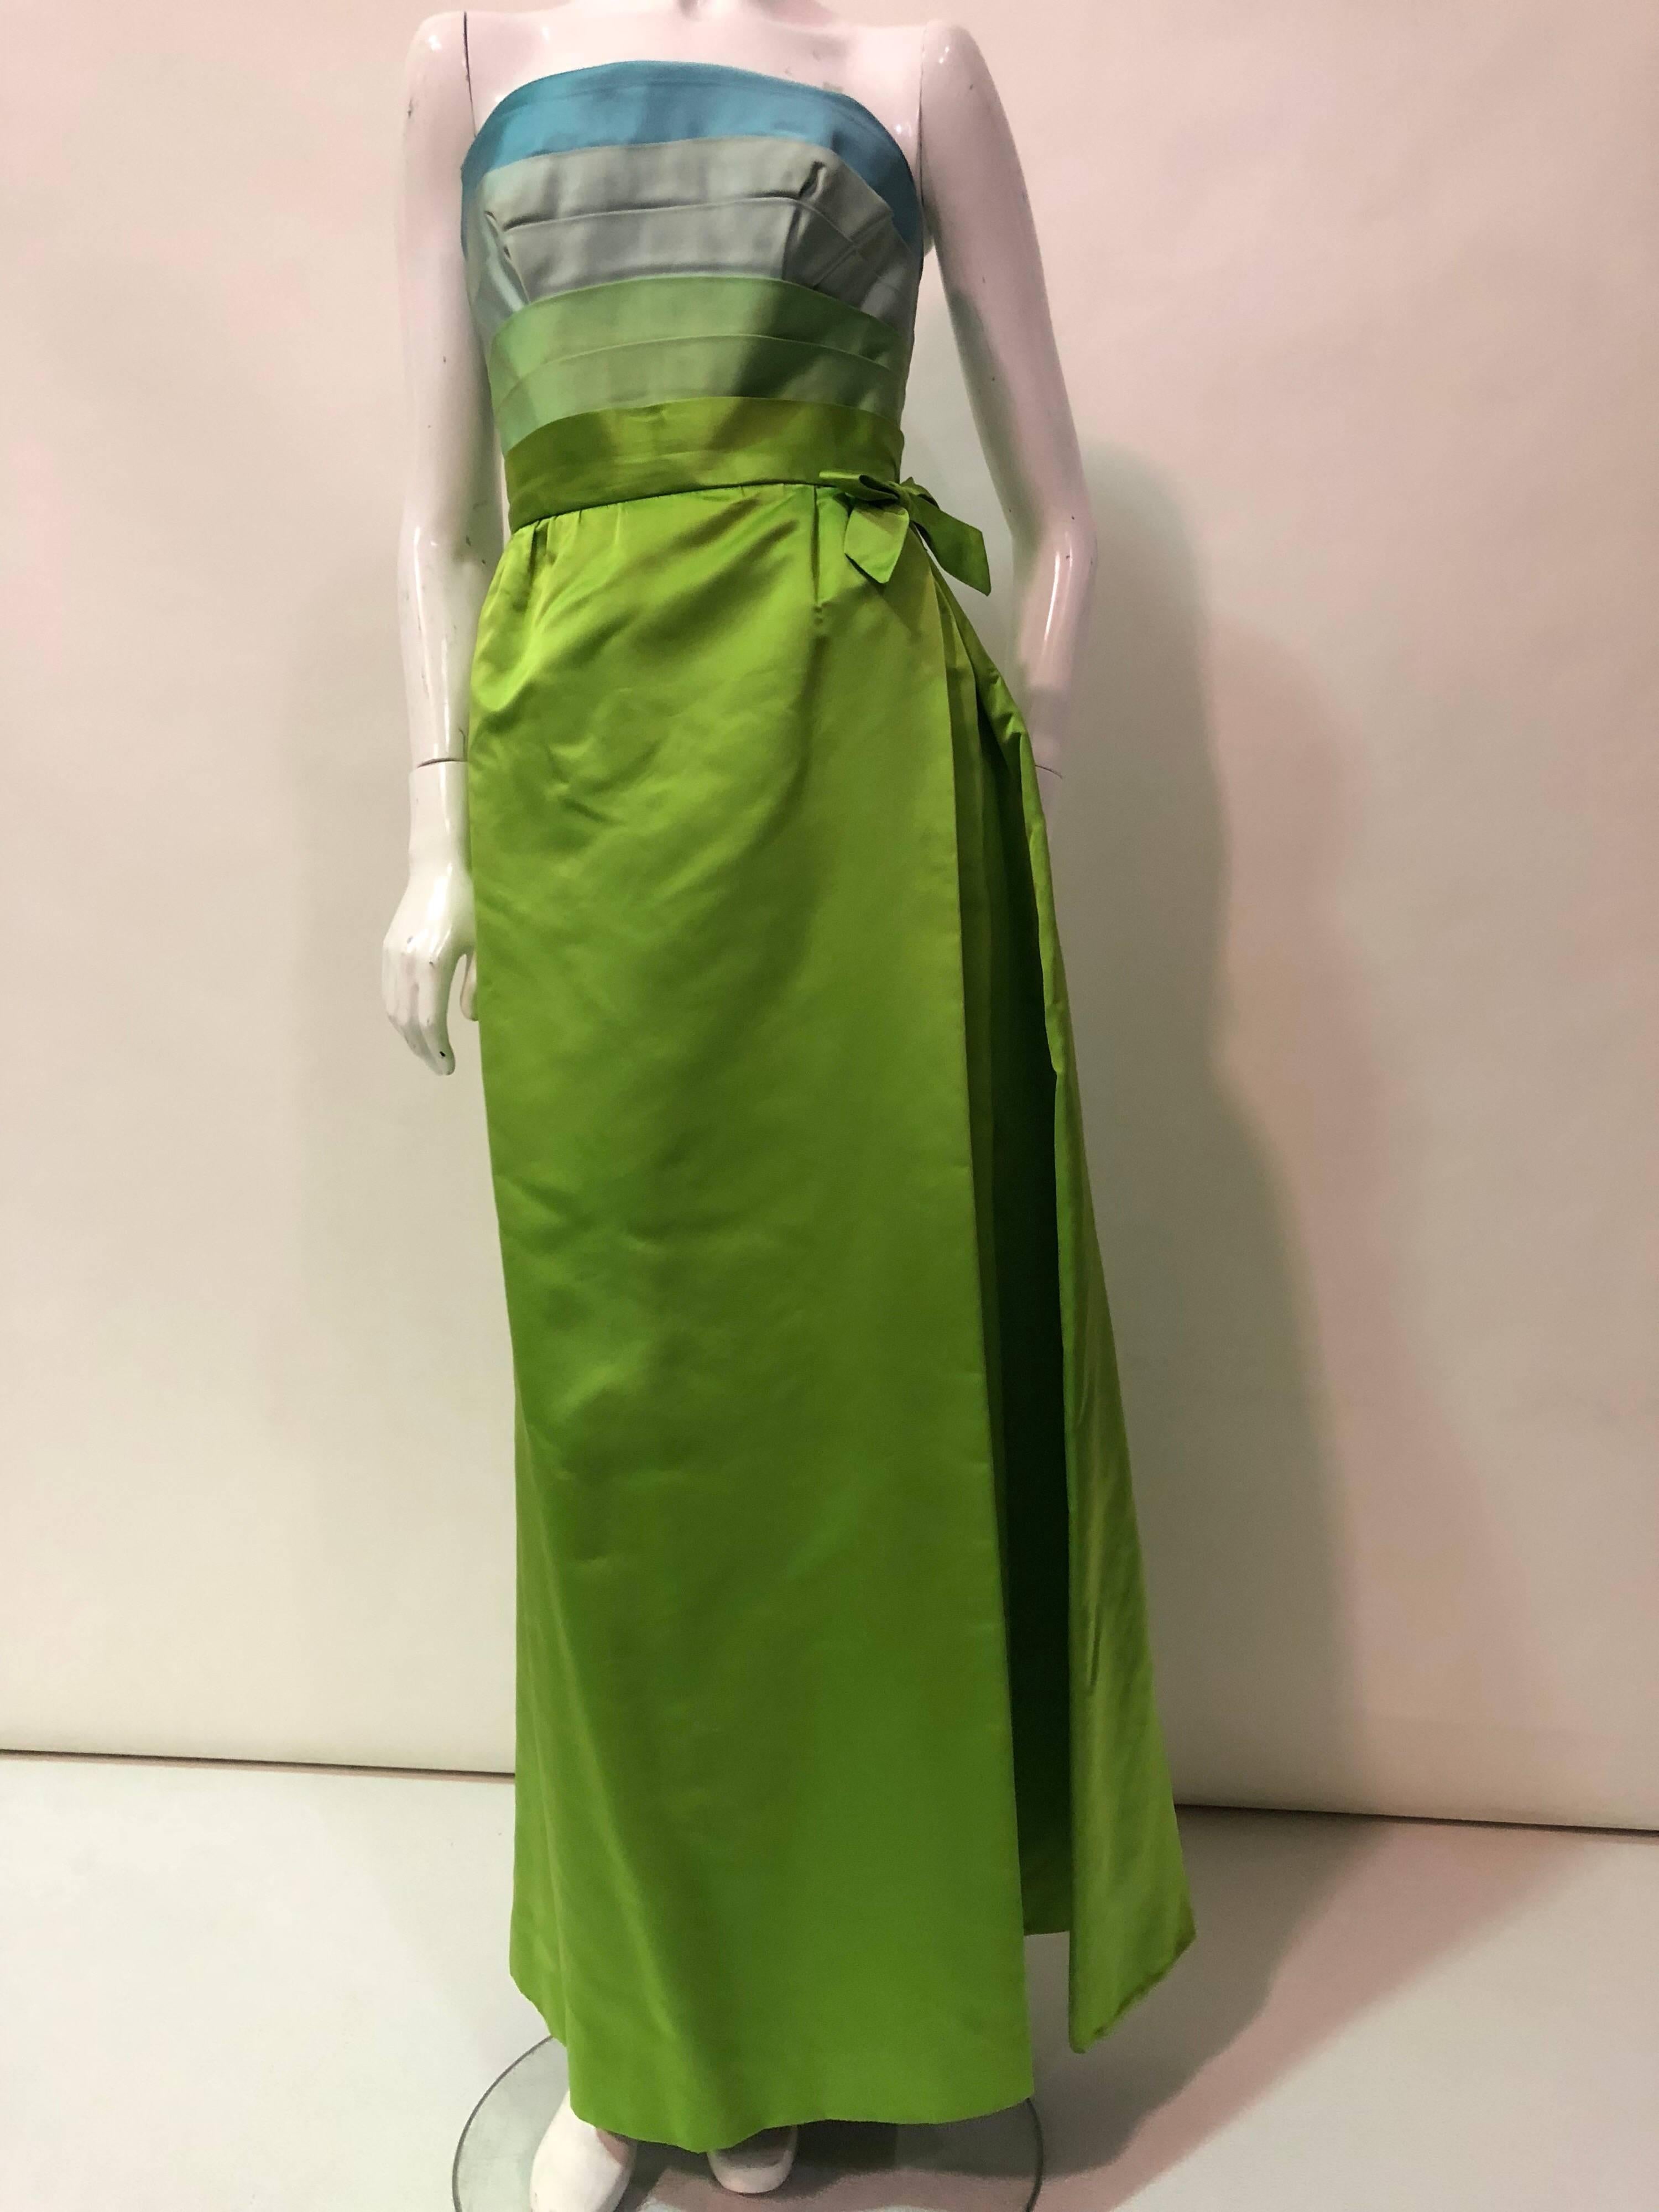 1950s Philip Hulitar silk satin column silhouette gown with aqua, turquoise and chartreuse pleated, strapless bodice.  Bodice is boned and structured.  Zipper at back.  Skirt has the appearance of a wrap-style with pleating and a bow at left side.  